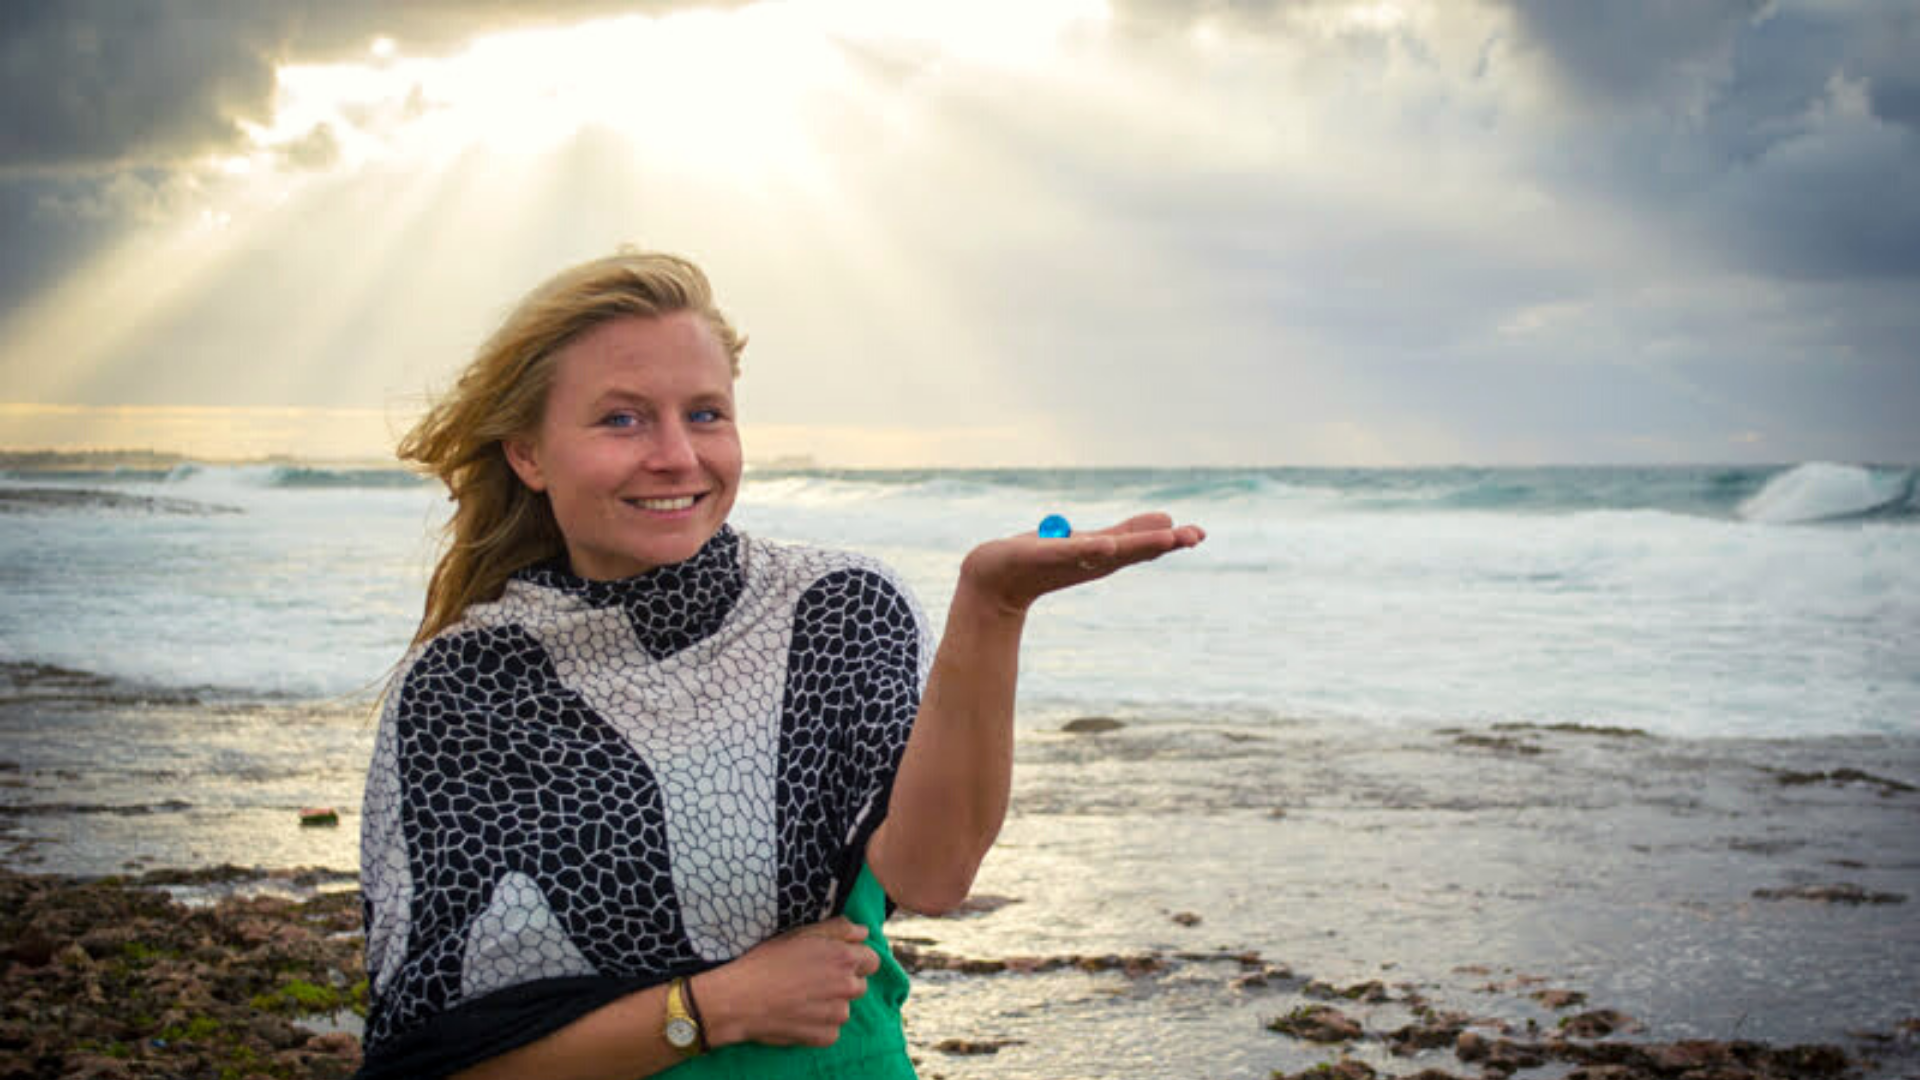 Surf and Heal Together with the Women of Groundswell Community Project